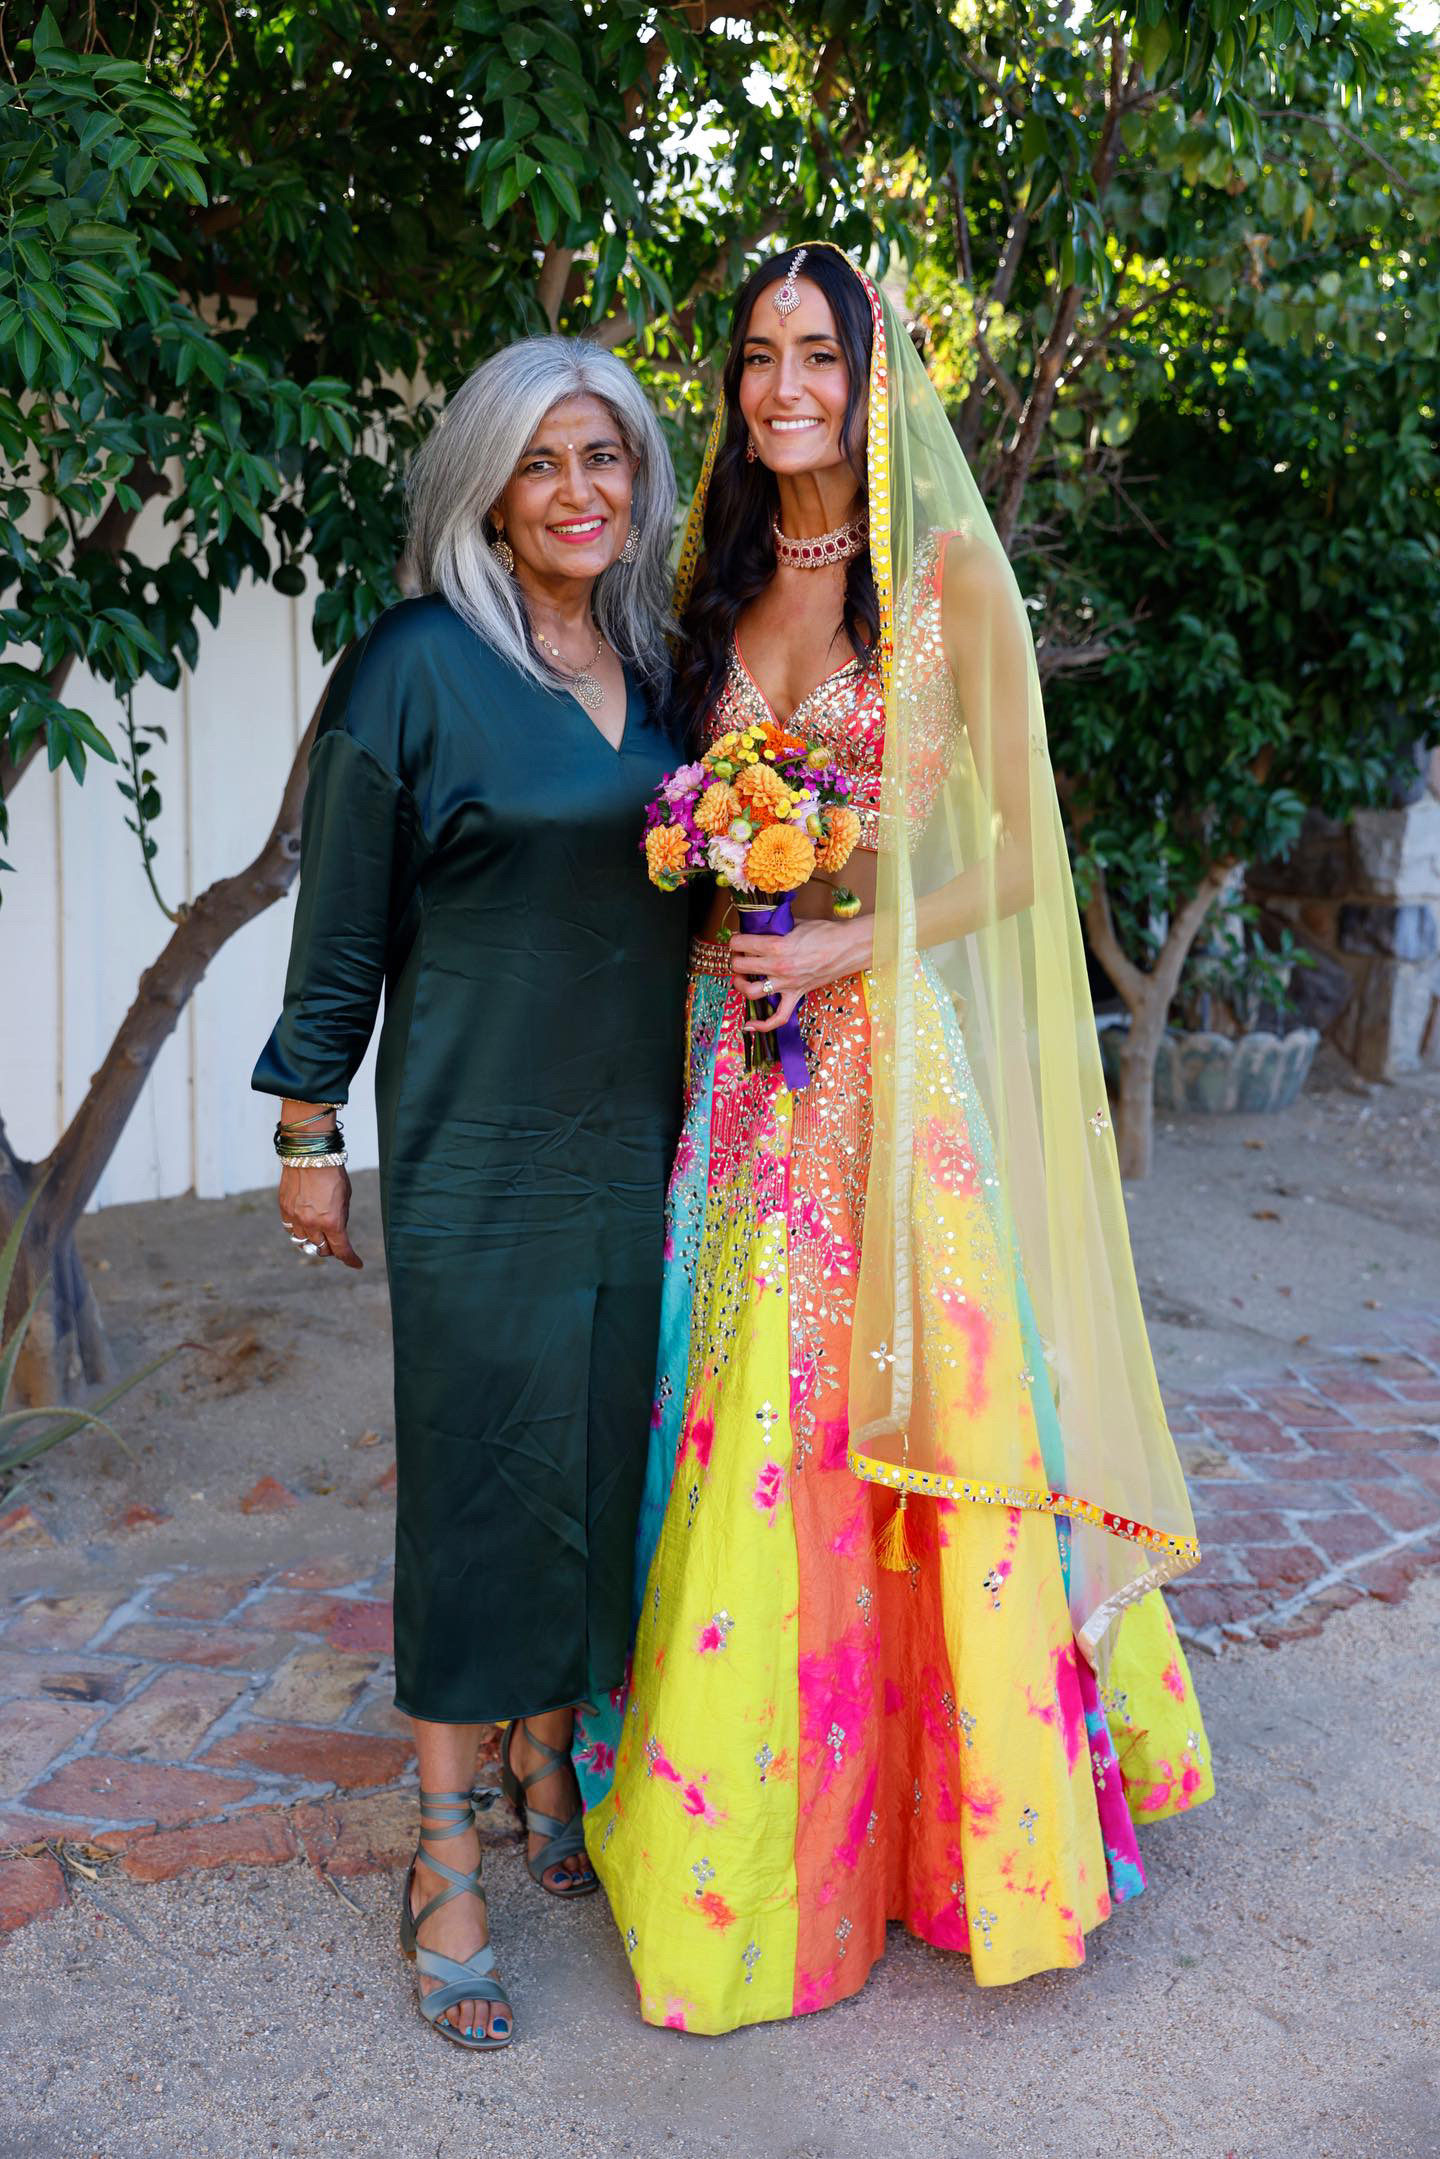 It's Not A Rave, It's A Desert Wedding: Embracing the Unconventional